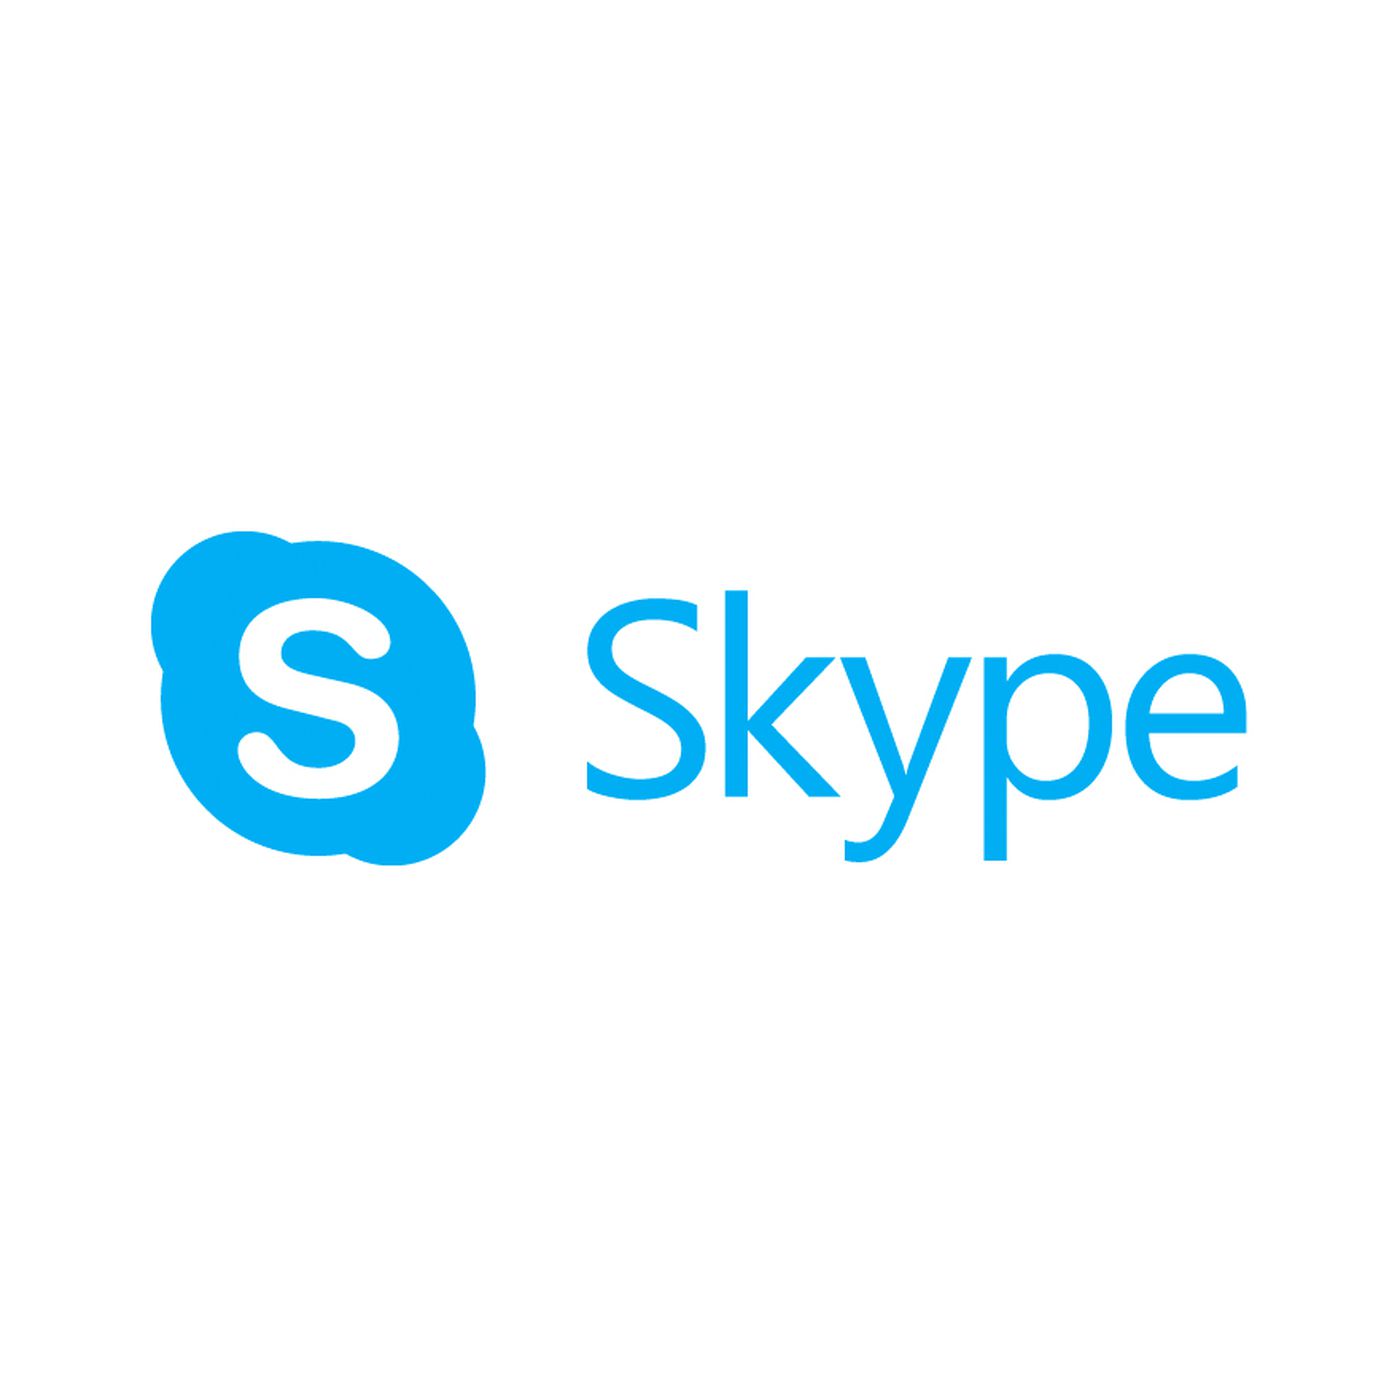 Microsoft's Skype struggles have created a Zoom moment - The Verge